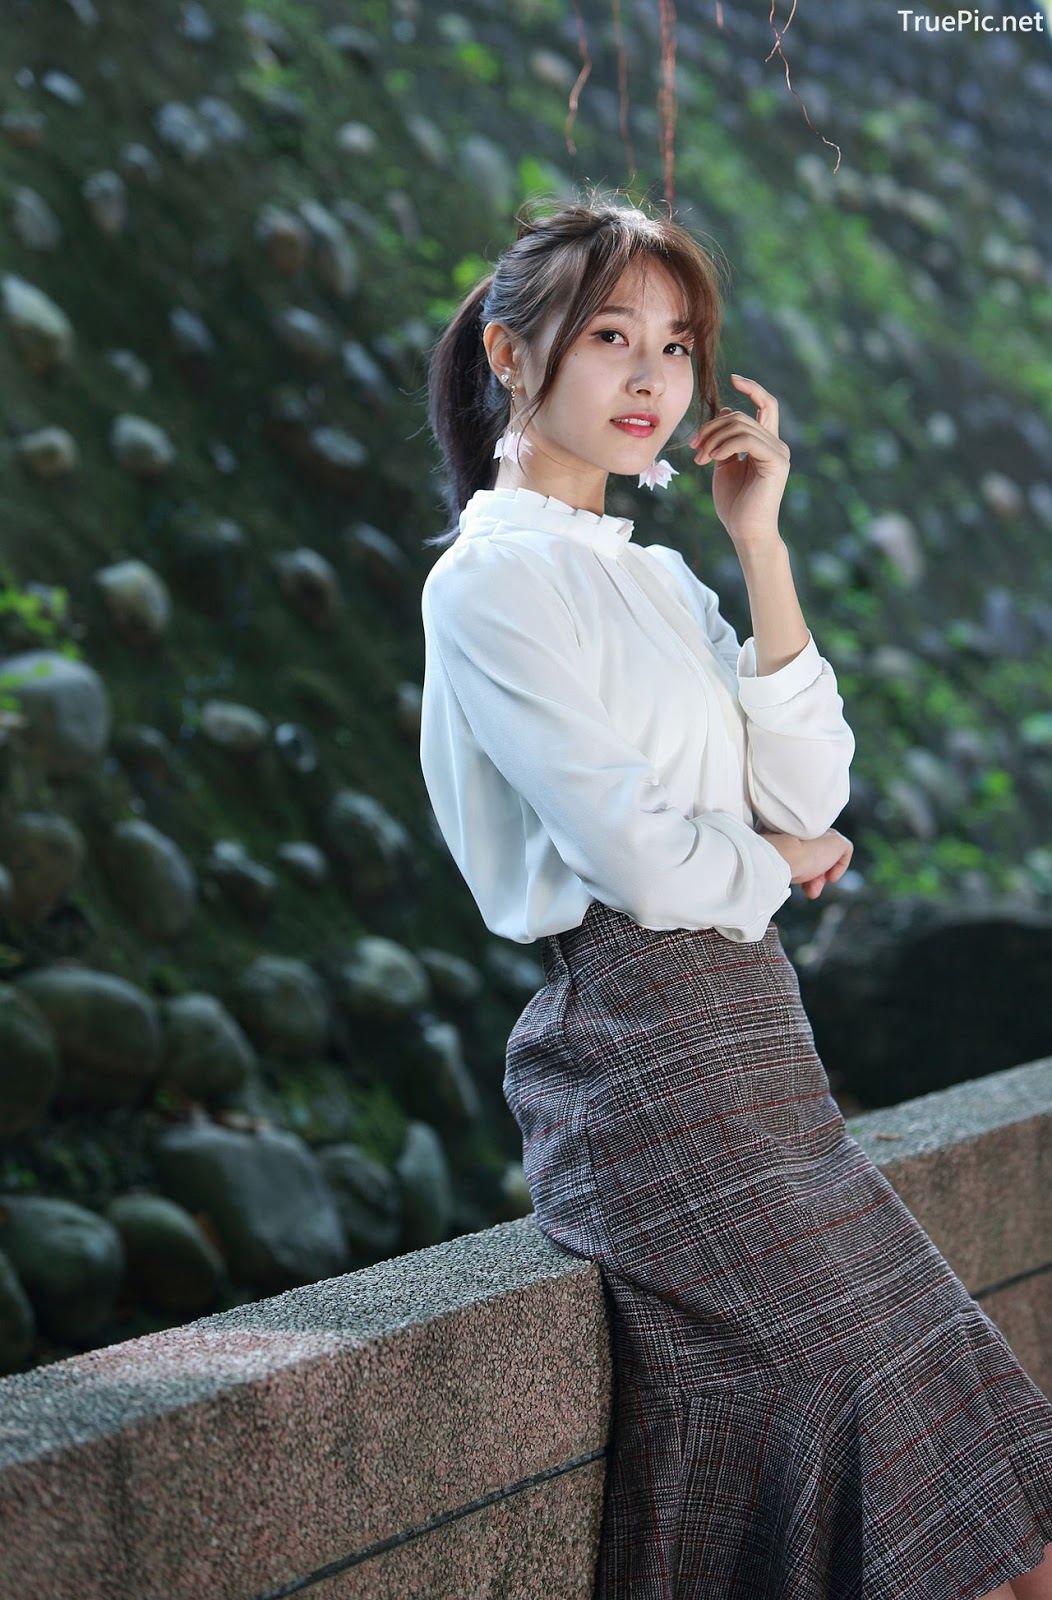 Image-Taiwanese-Model-郭思敏-Pure-And-Gorgeous-Girl-In-Office-Uniform-TruePic.net- Picture-15